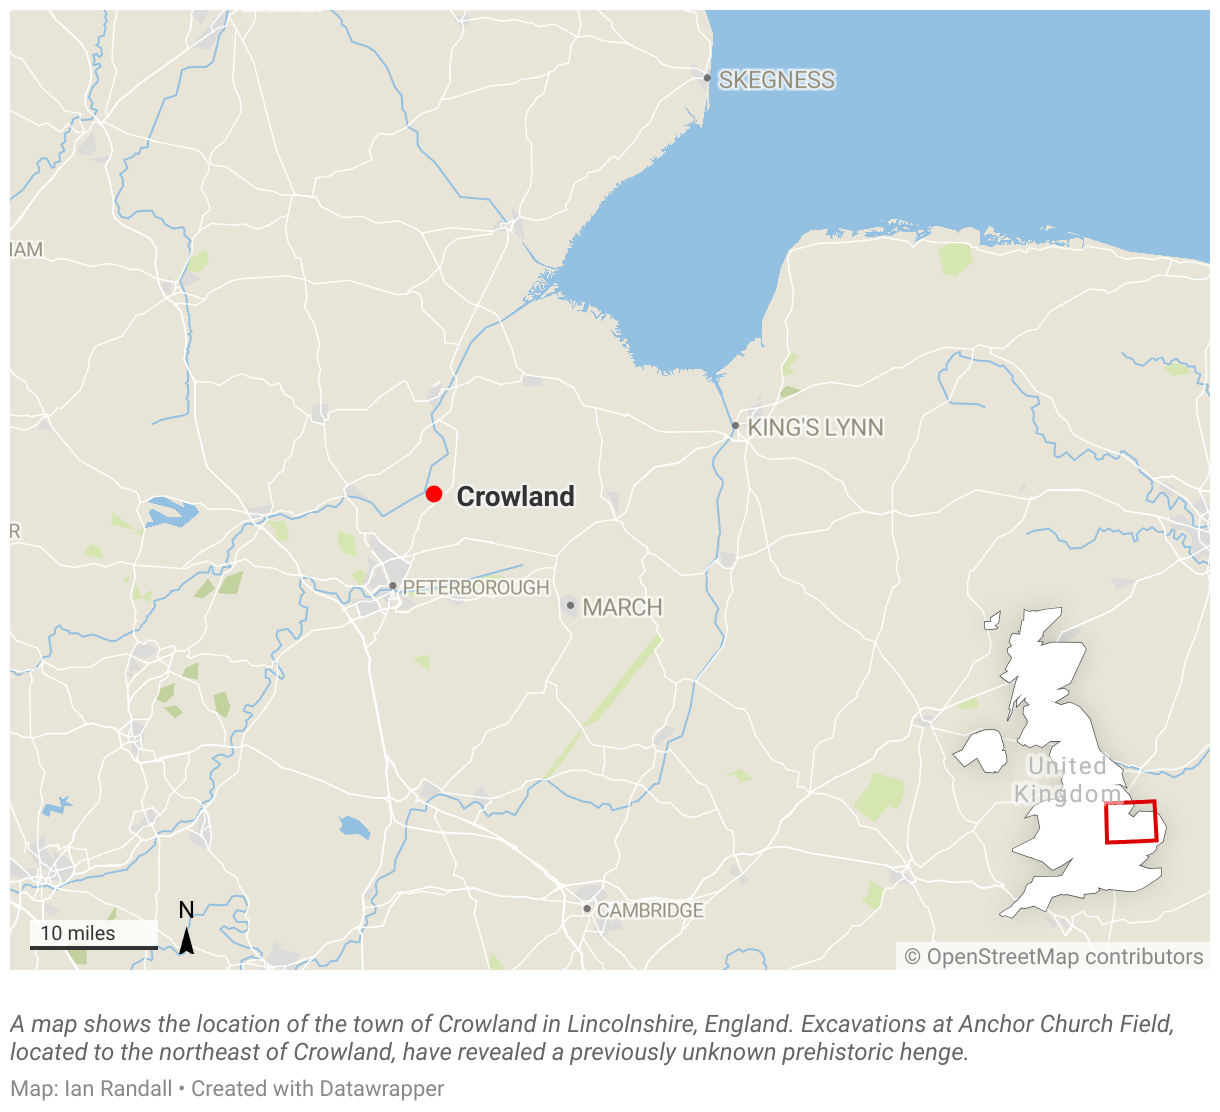 A map shows the location of the town of Crowland in Lincolnshire, England.